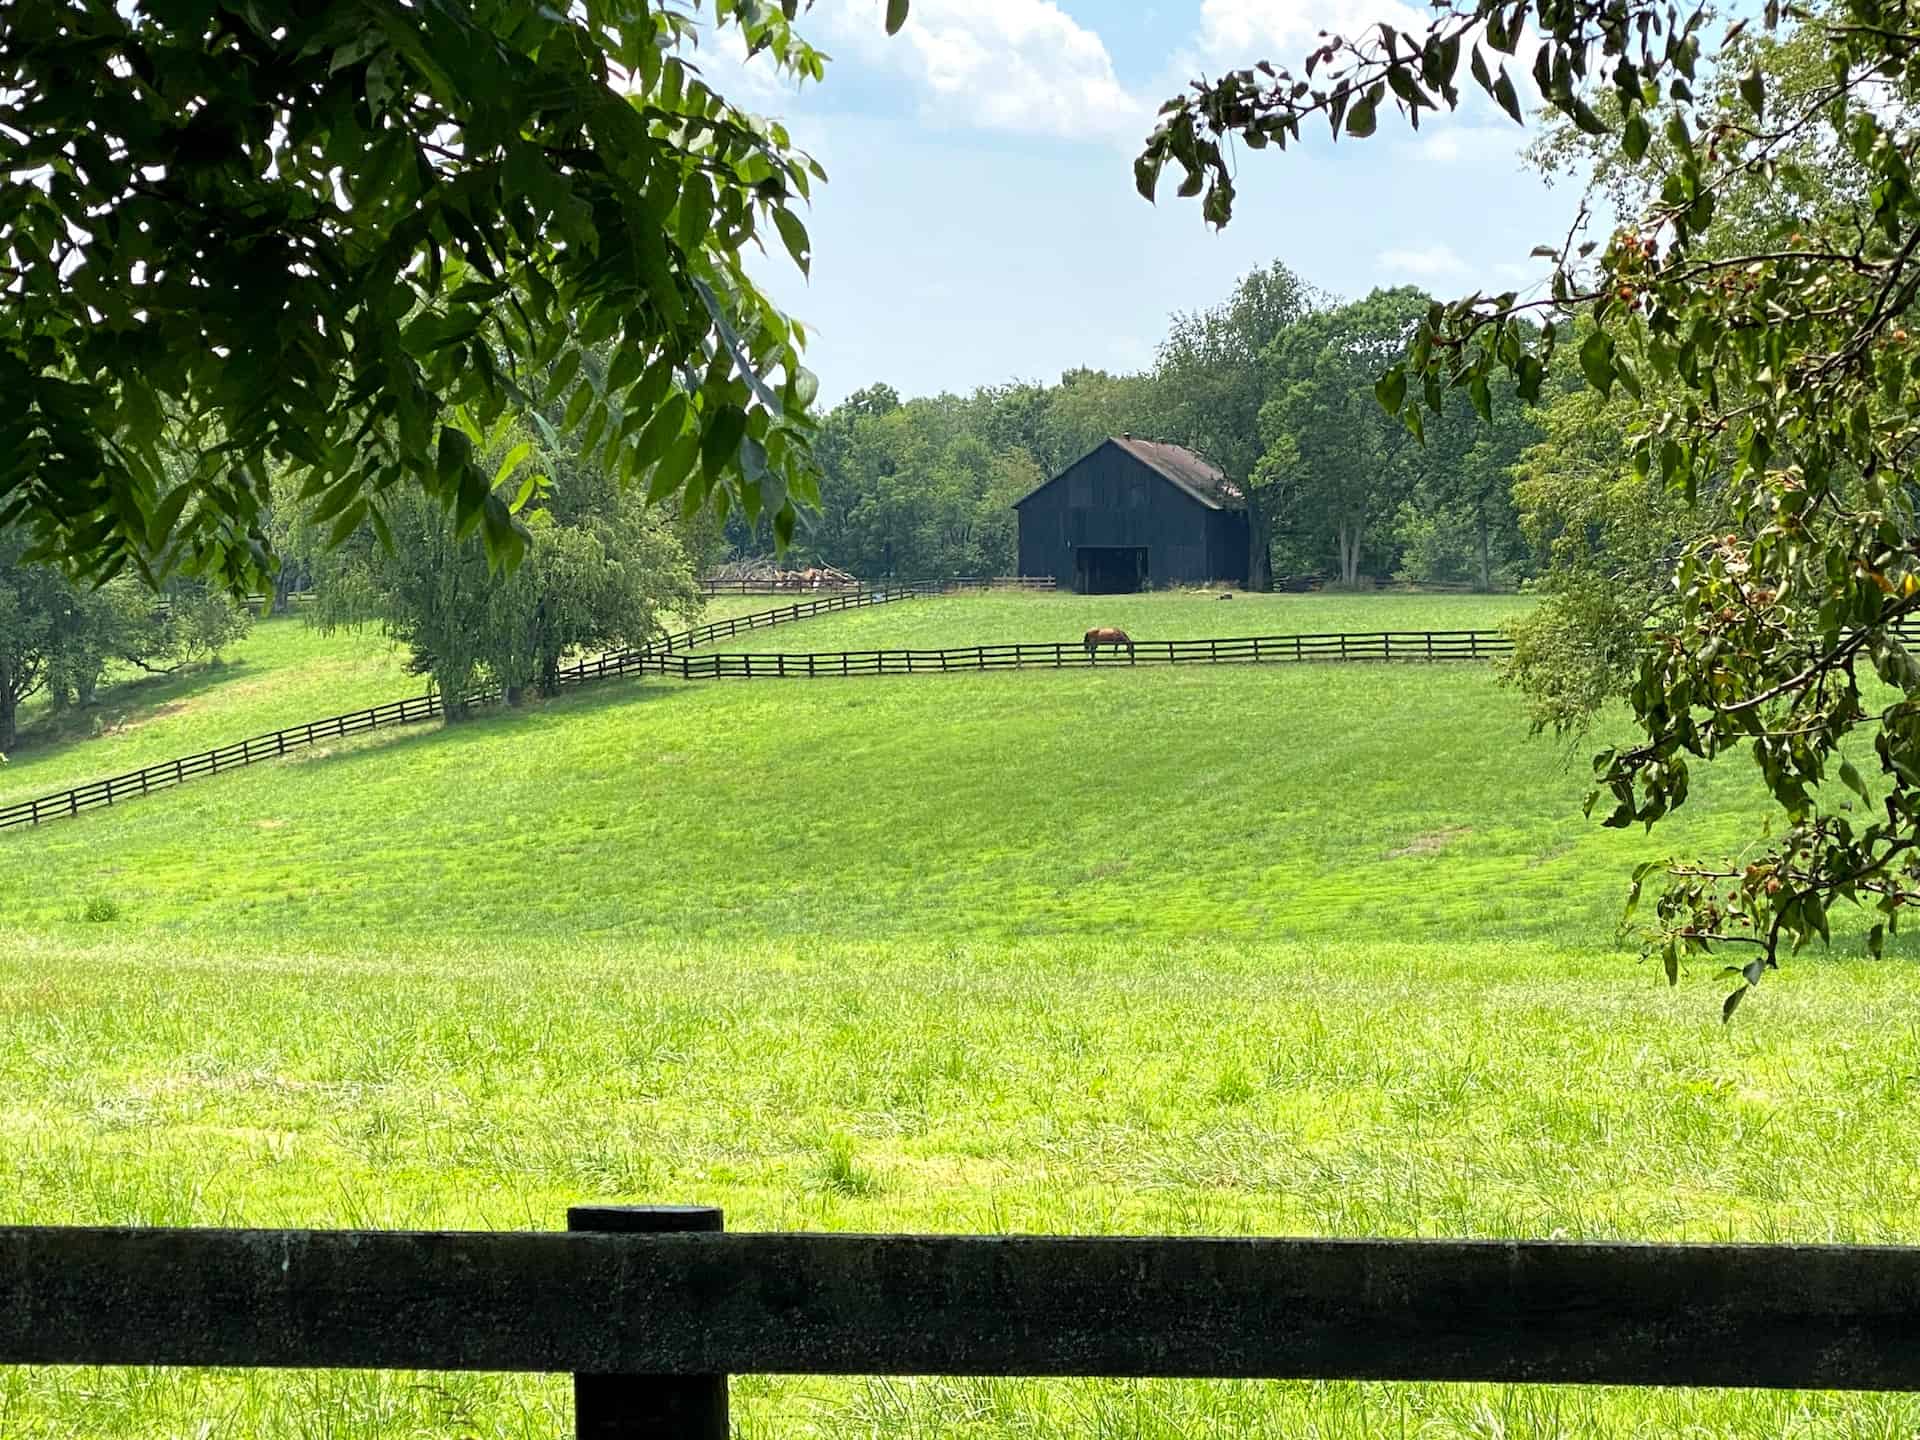 Rustic Barn, Green Pastures and a Horse living its life.